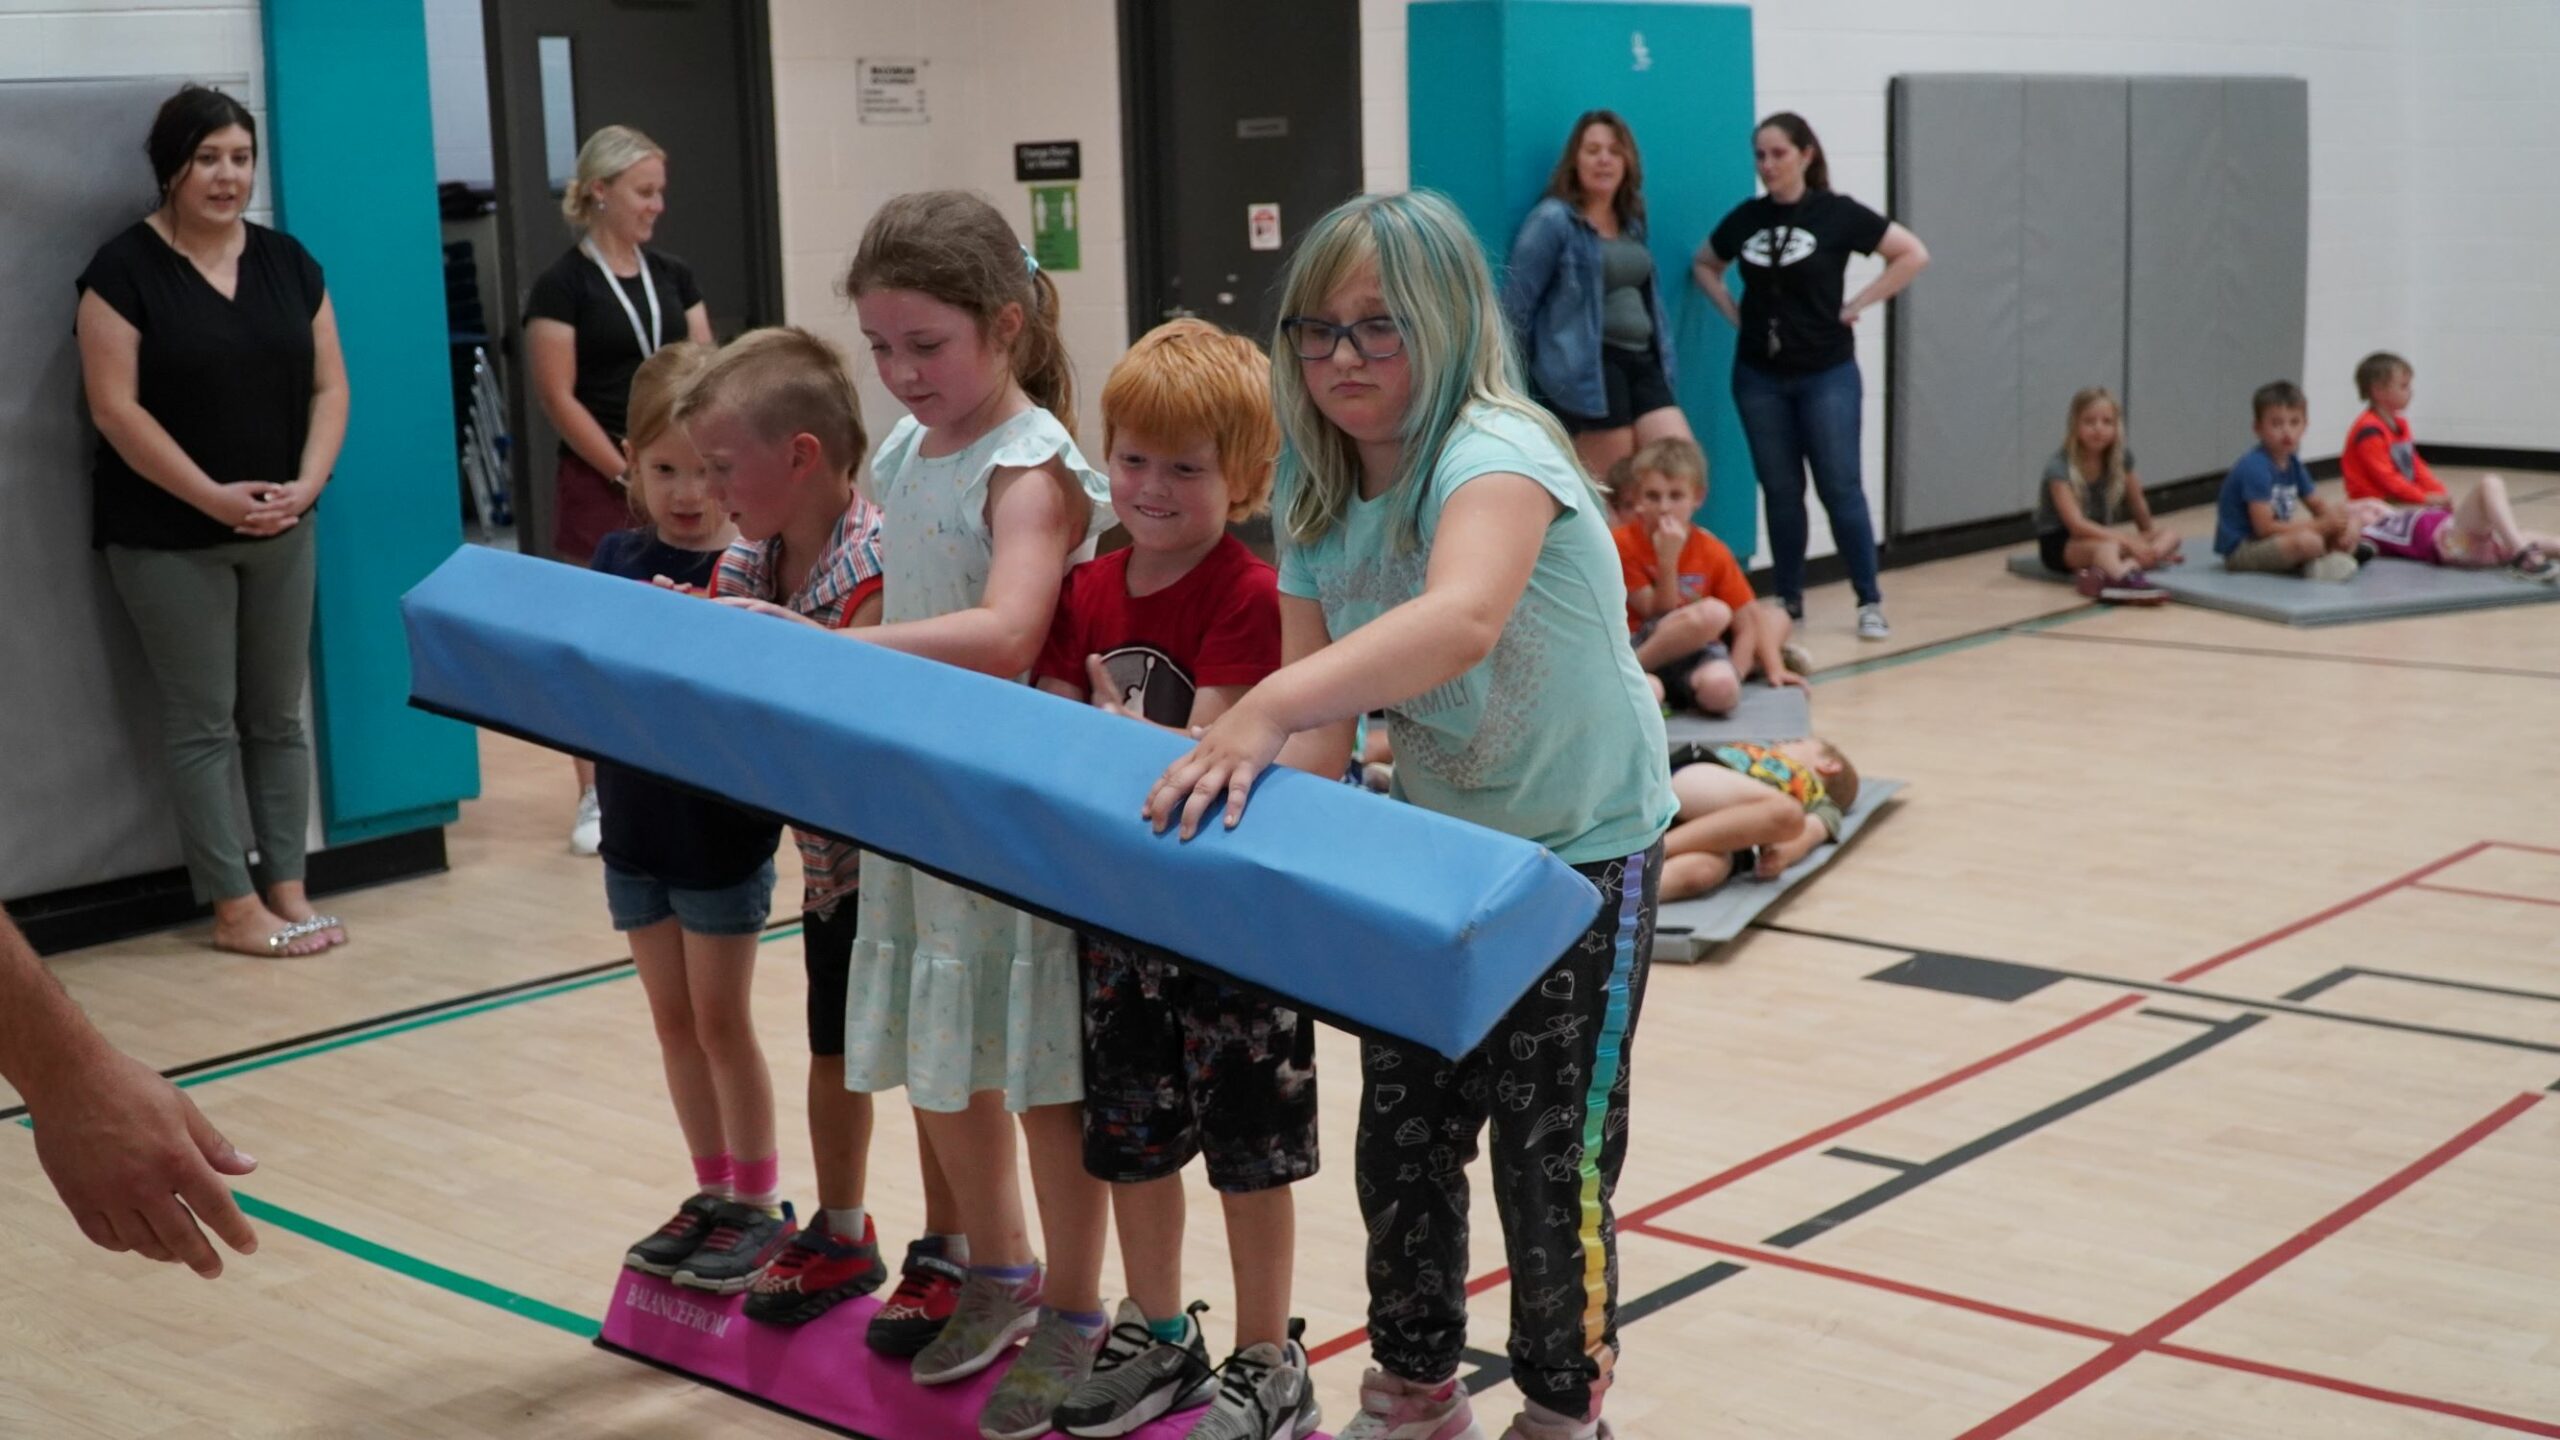 St. Clair Catholic Summer Learning Camps Wrap Up After Three Week Run